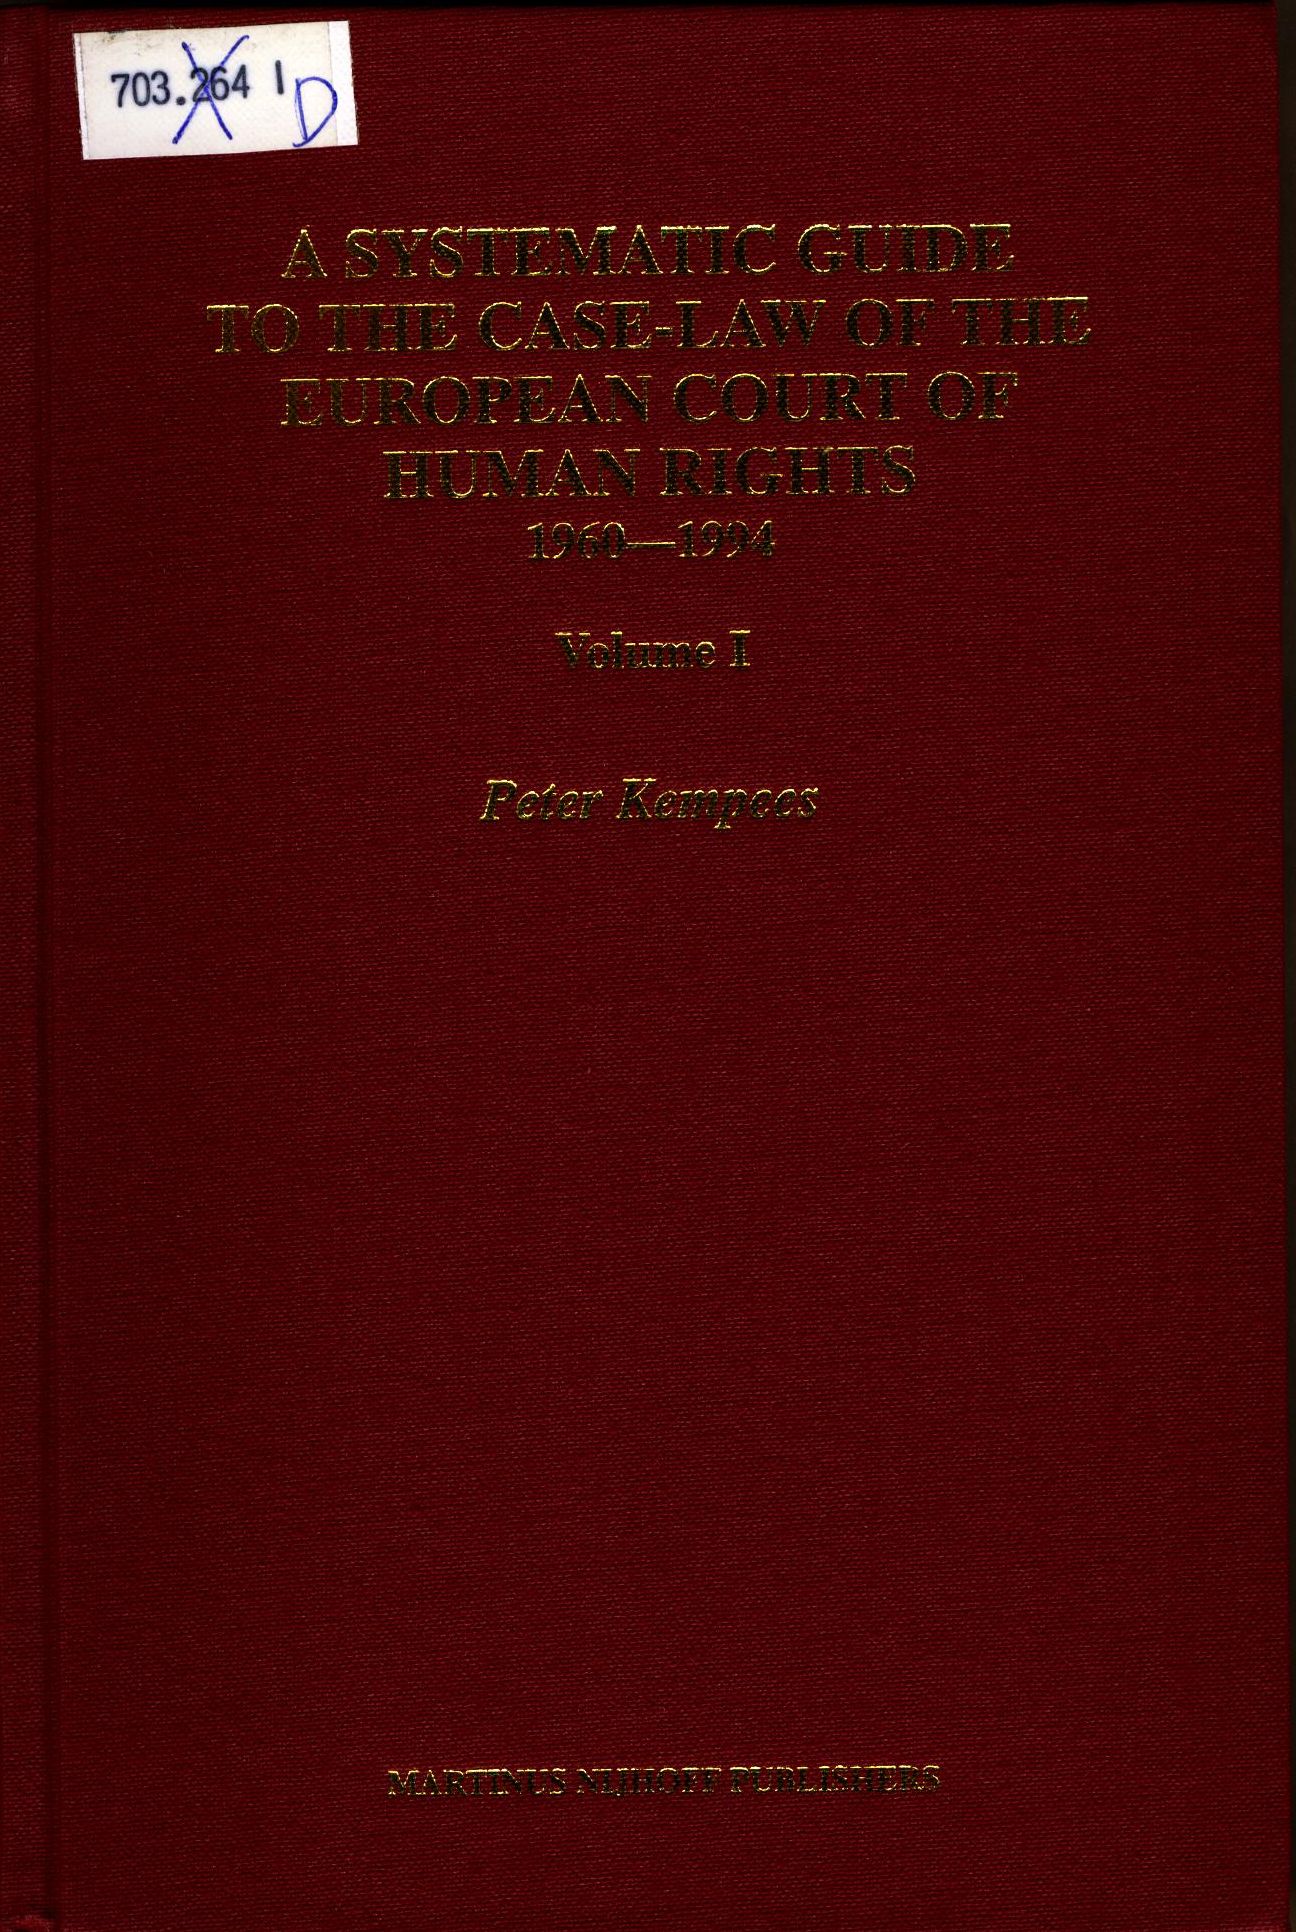 A Systematic Guide to the Case Law of the European Court of Human Rights, 1960-1994  1996 - Kempees, Peter